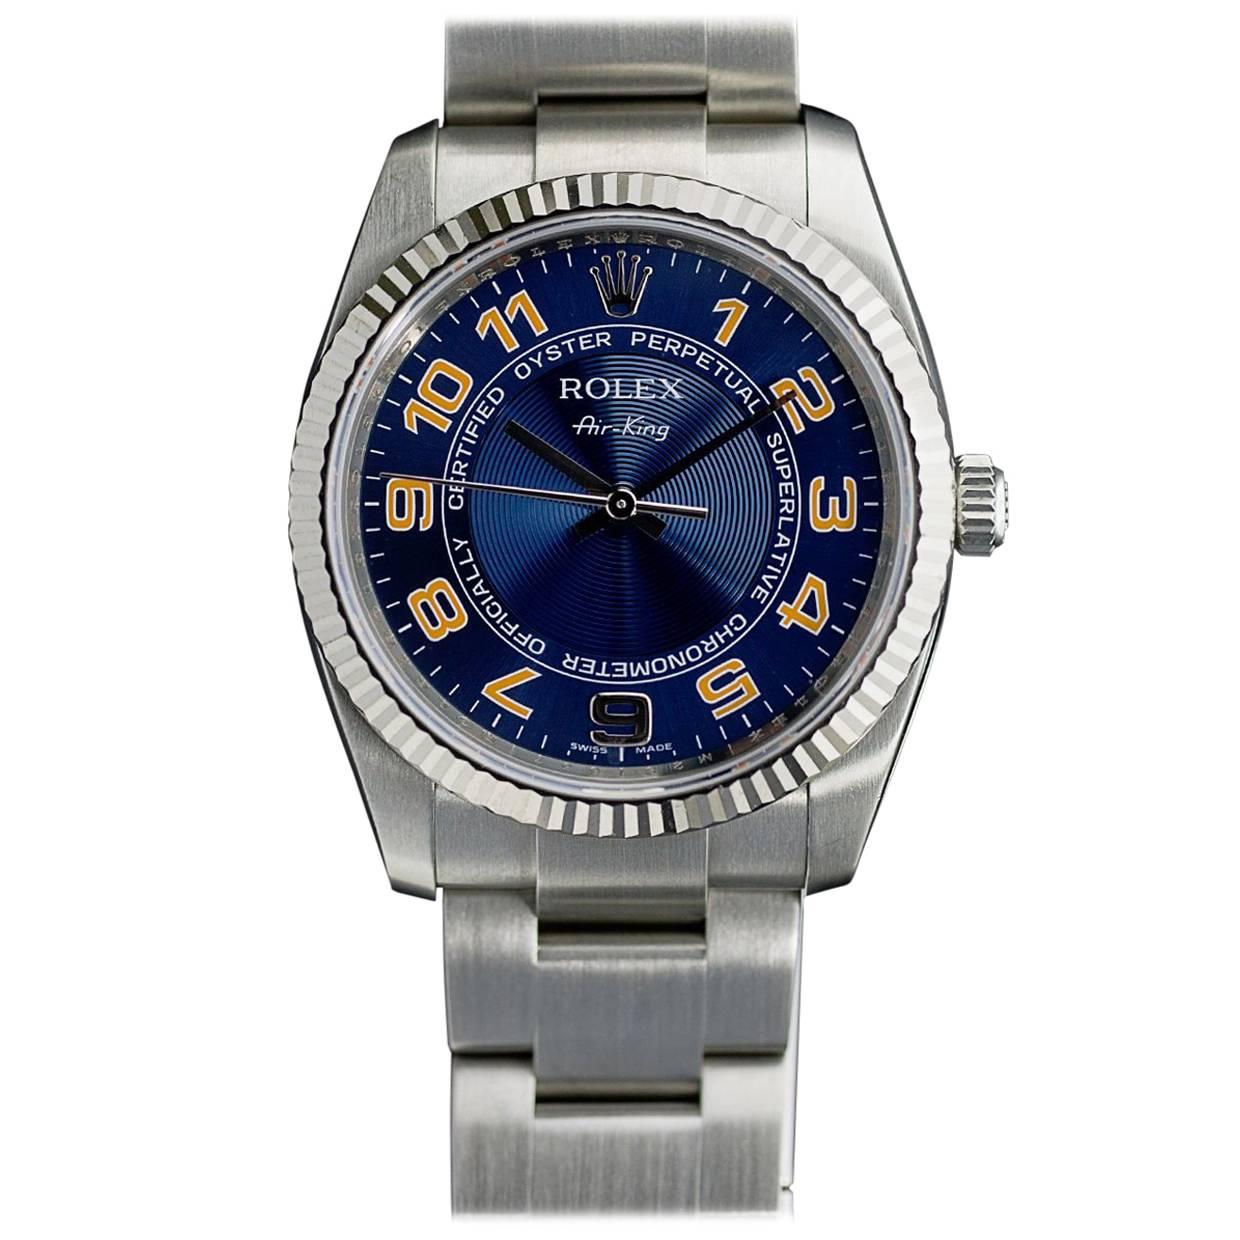 Rolex stainless steel Oyster Perpetual Air King Blue Dial Wristwatch Ref 114234